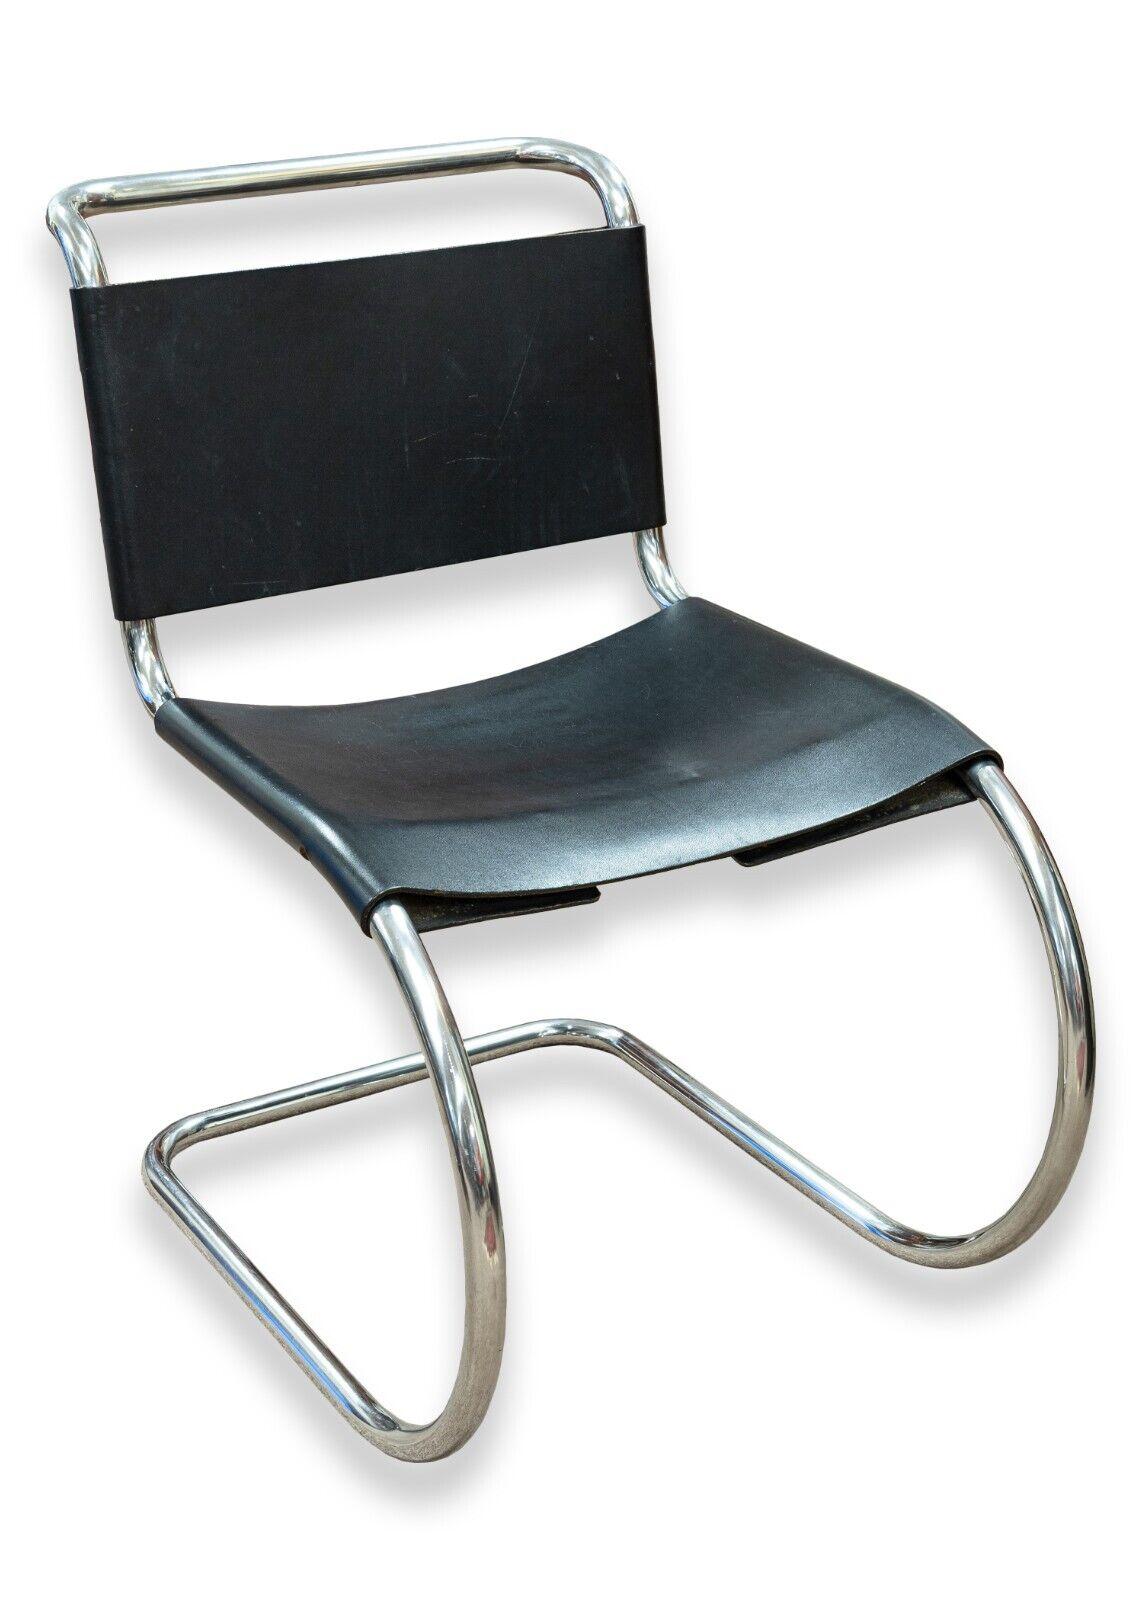 A set of 6 Knoll Marcel Breuer cantilever leather chairs. An iconic set of chairs from Knoll by Marcel Breuer. This set of cantilever chairs feature a chrome metal construction with leather seating and backing. These chairs feature a line of ties on